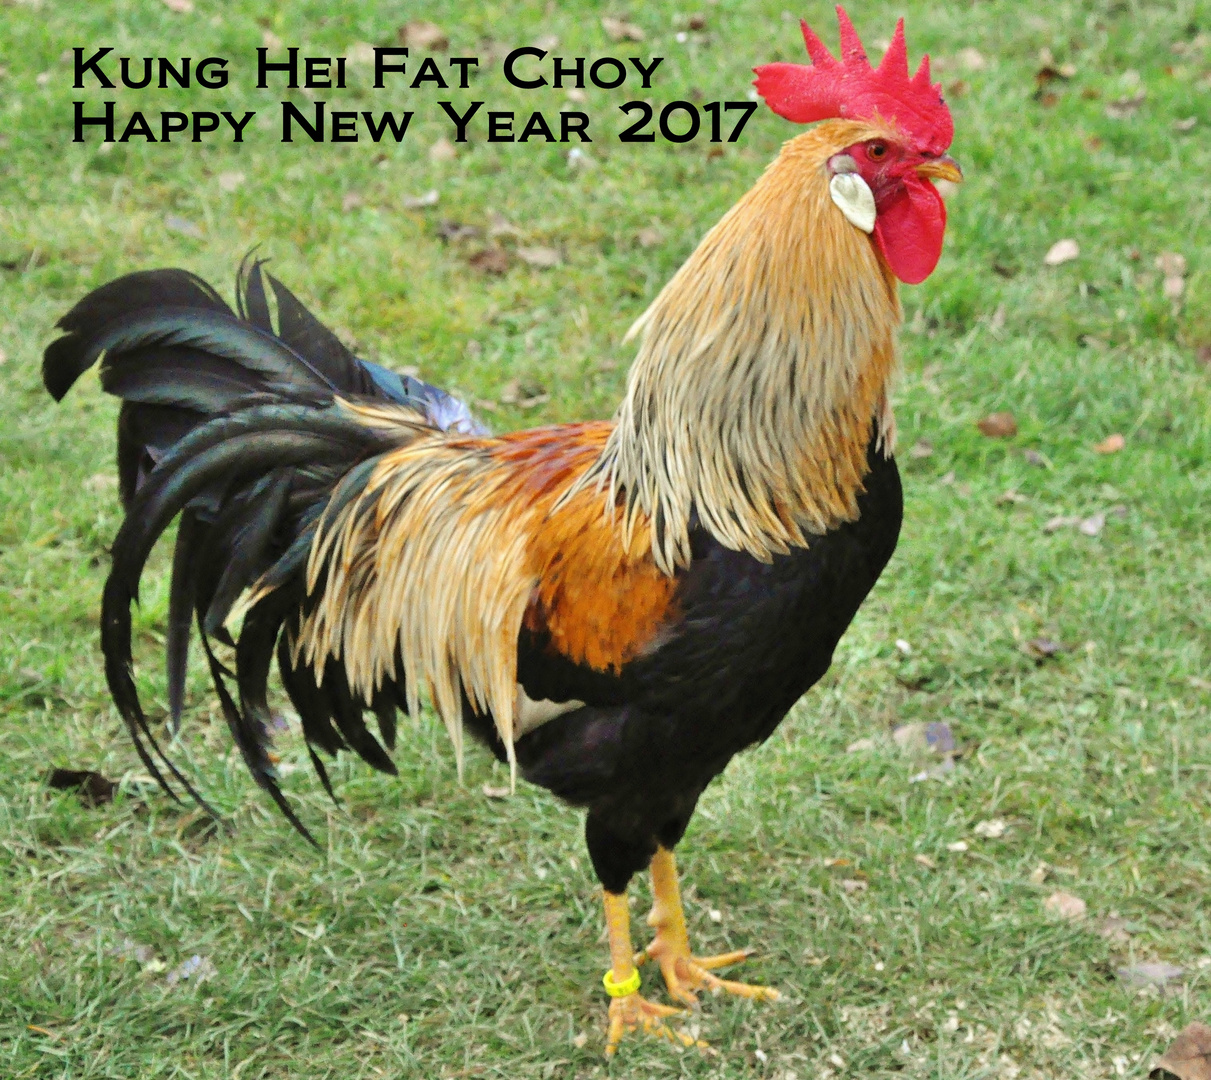 Kung Hei Fat Choy - Happy New Year 2017